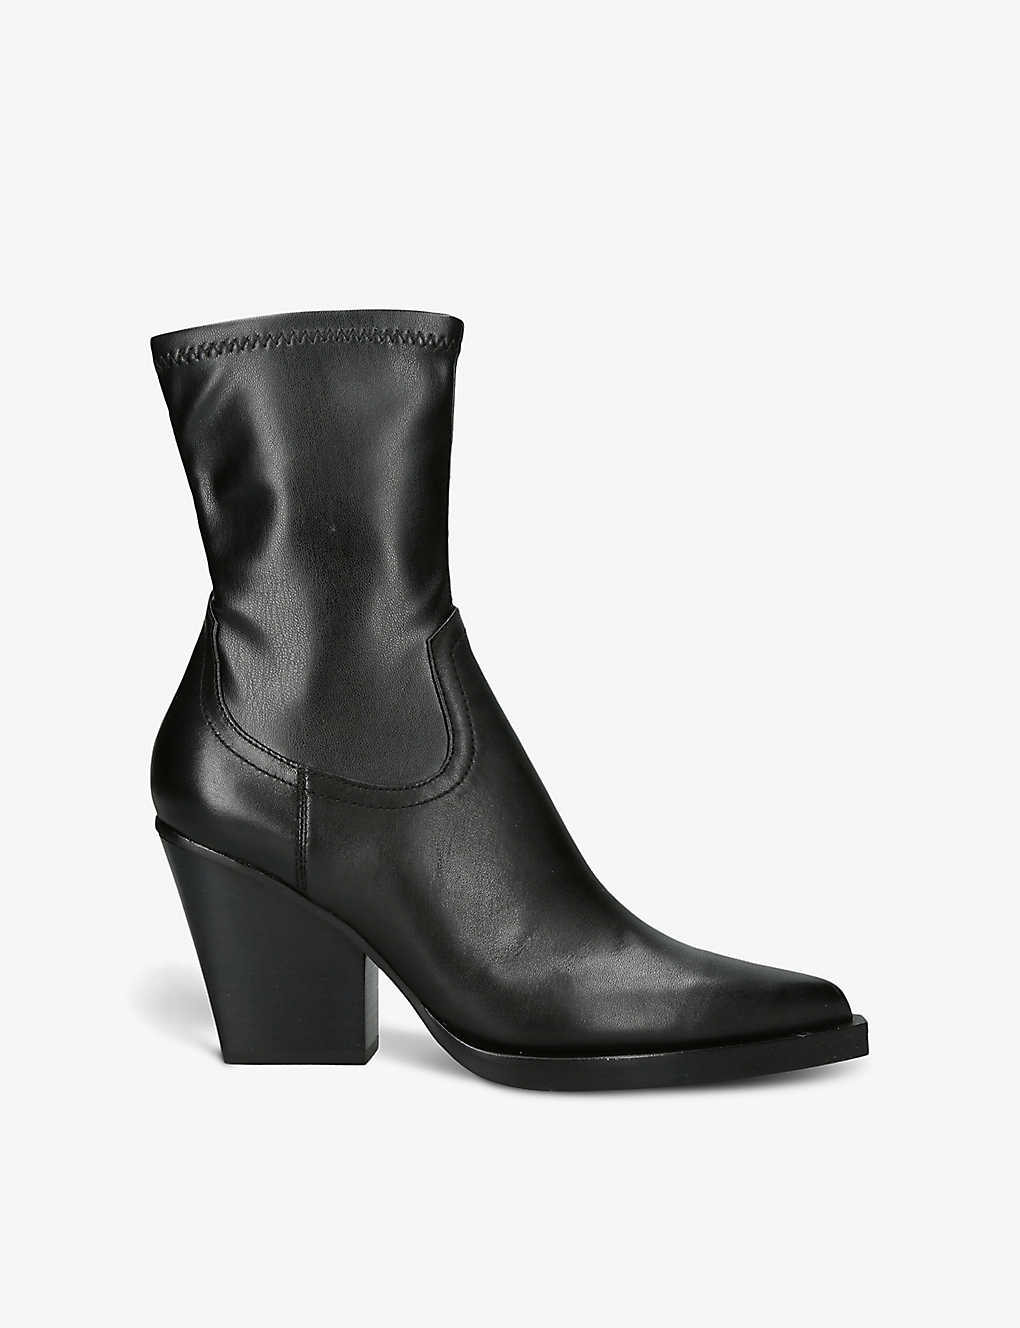 Dolce Vita Womens Black Boyde Leather Heeled Ankle Boots